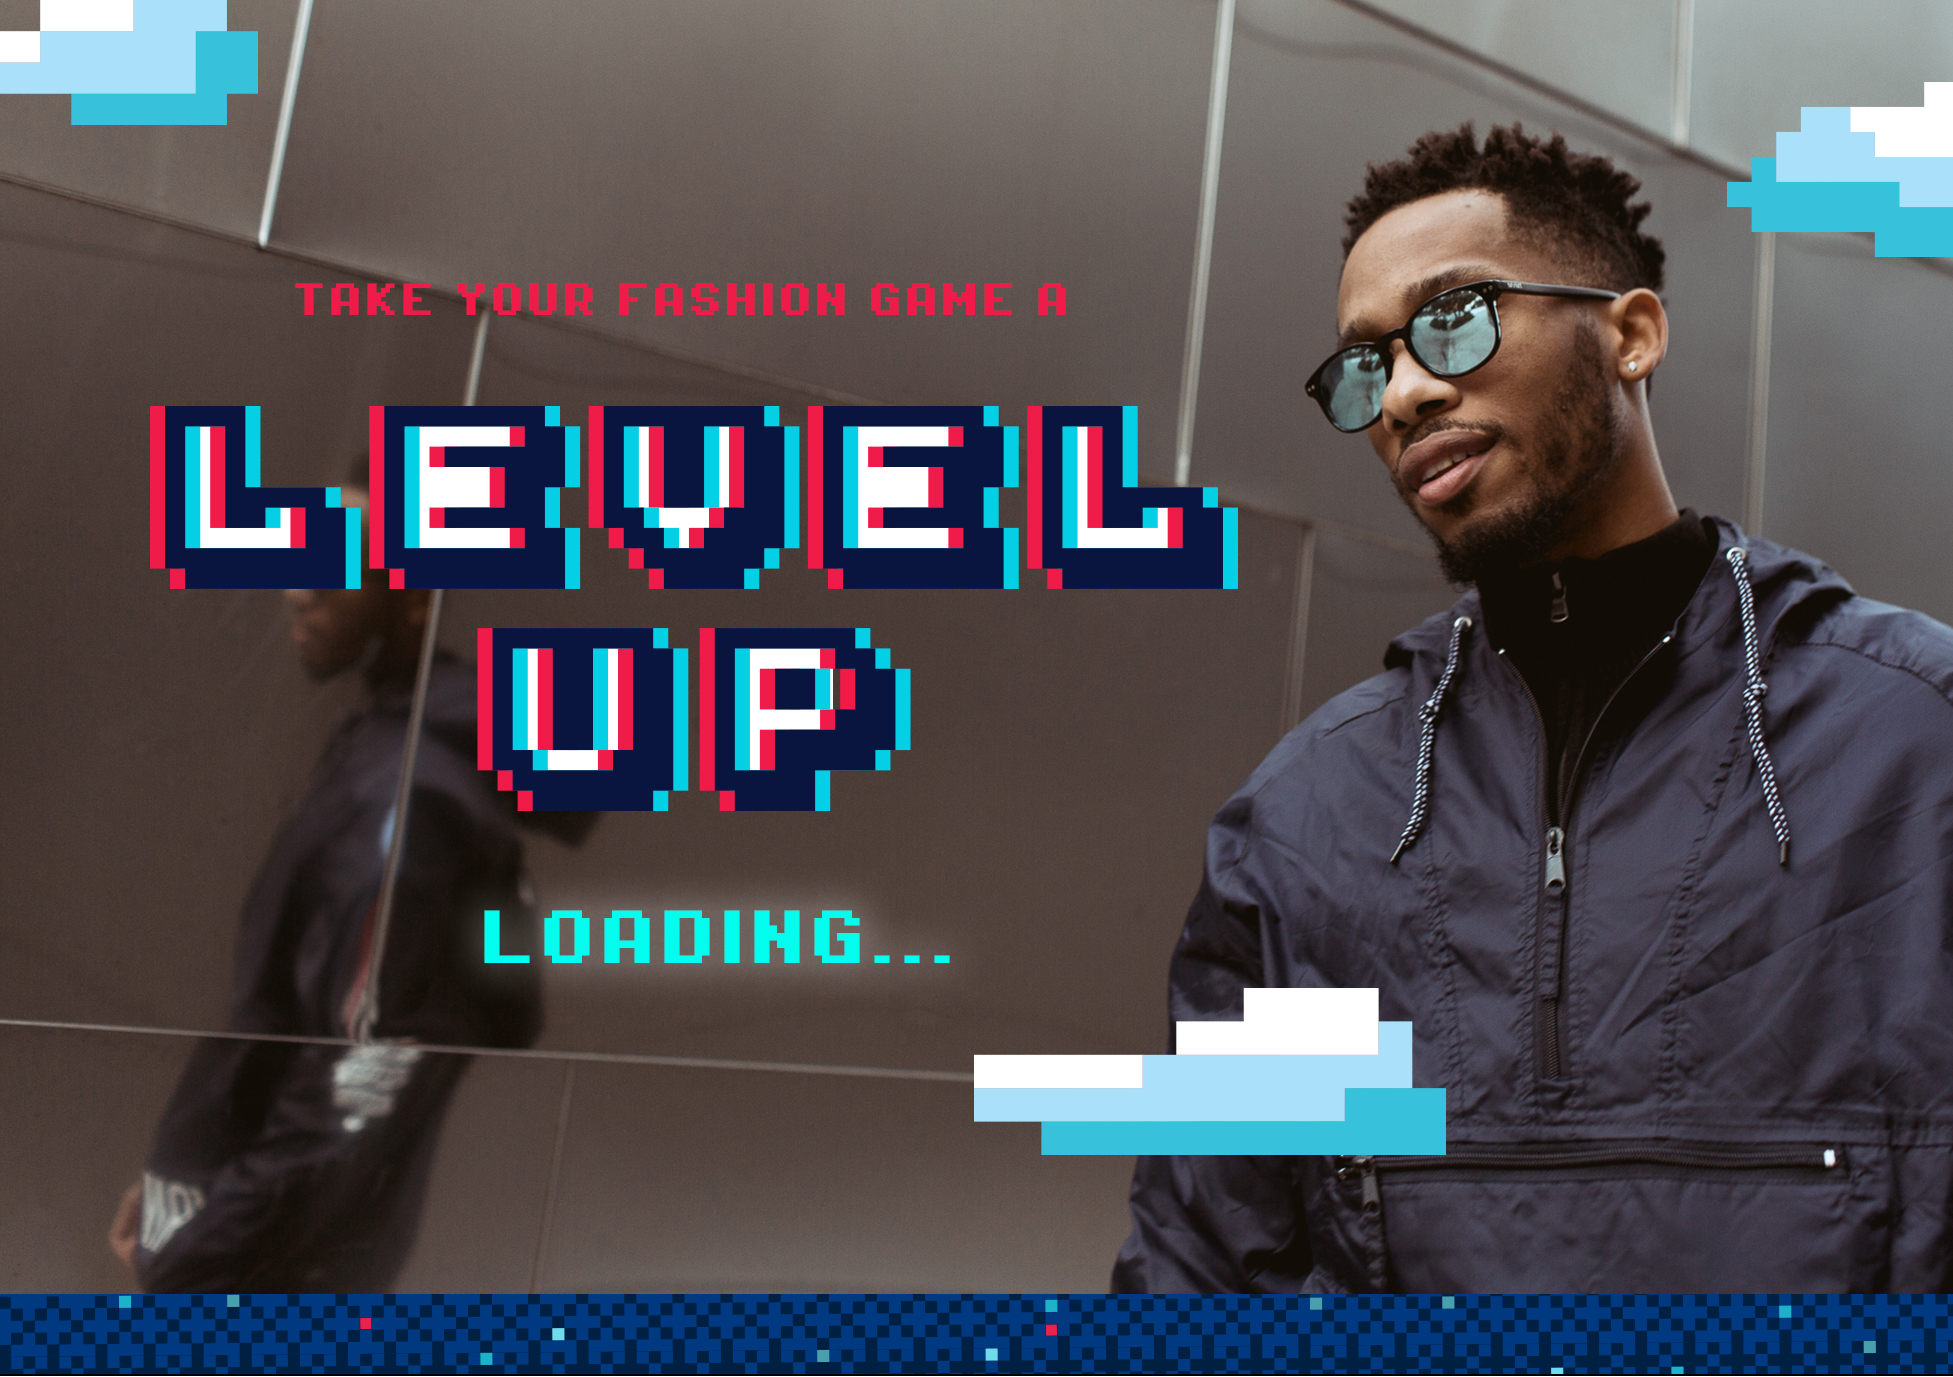 Take your fashion game a level up. Loading...